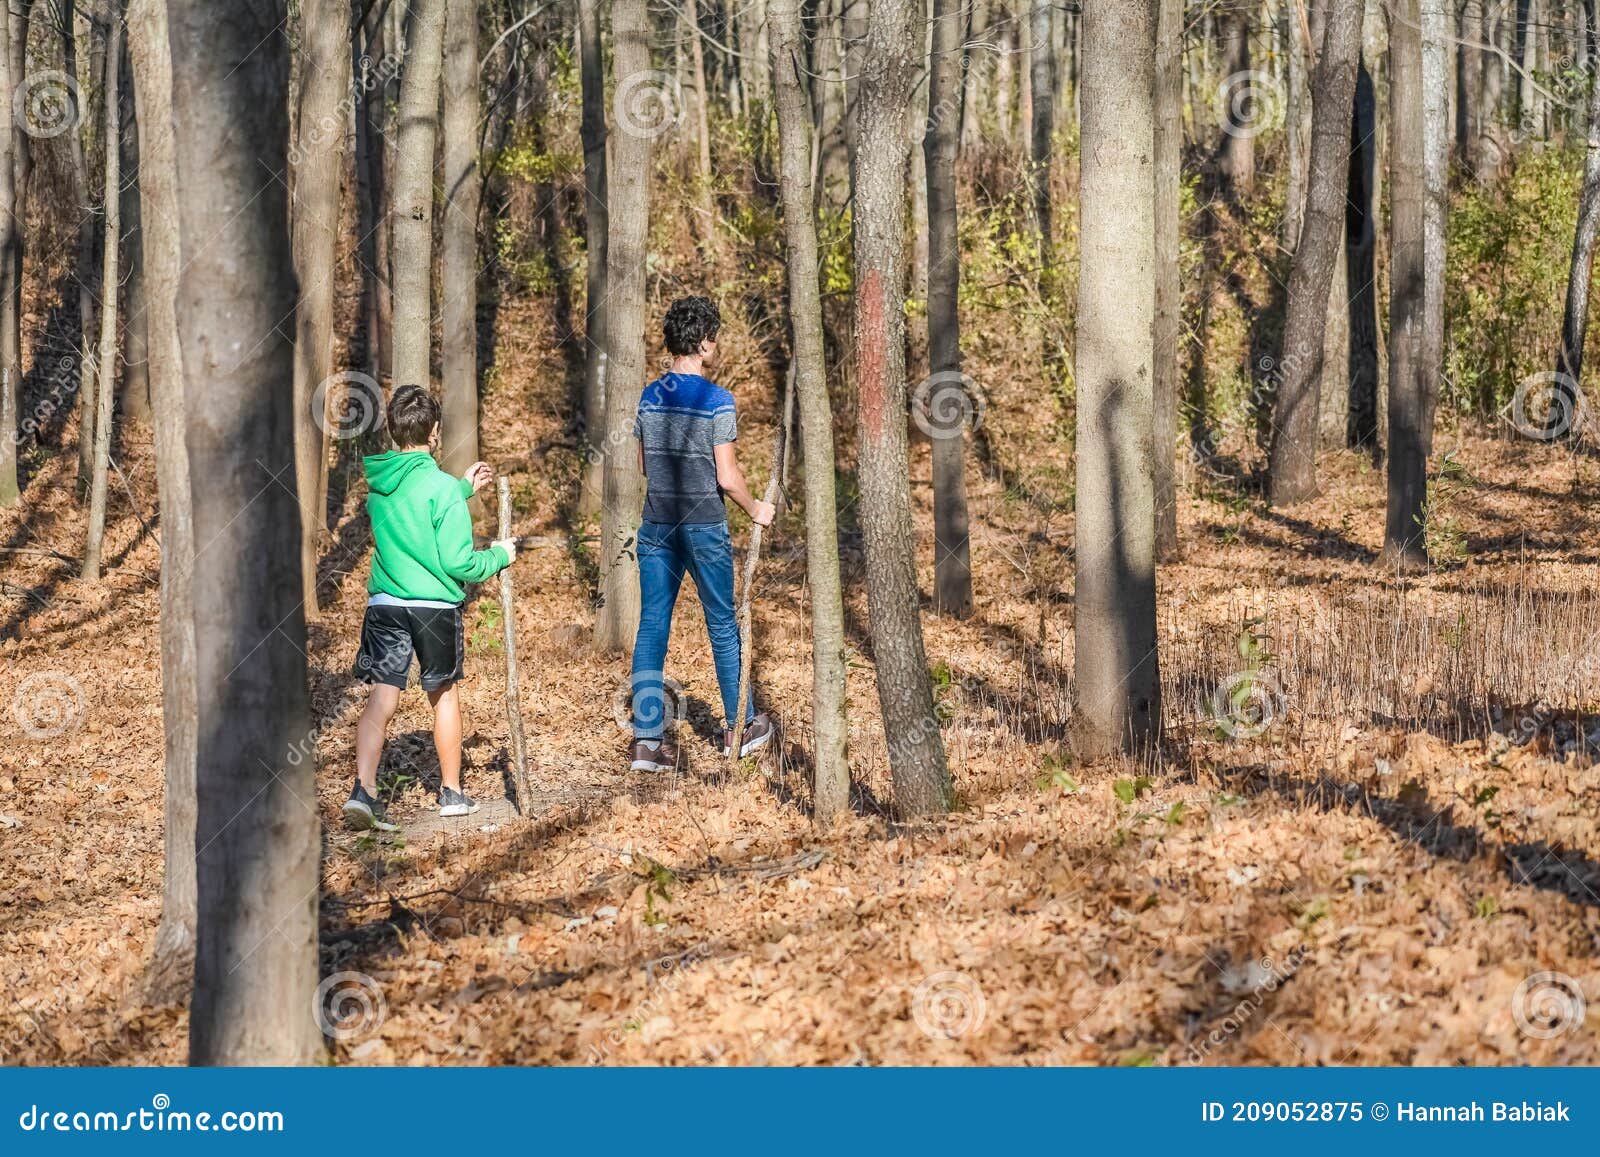 two boys with walking sticks walking through forest